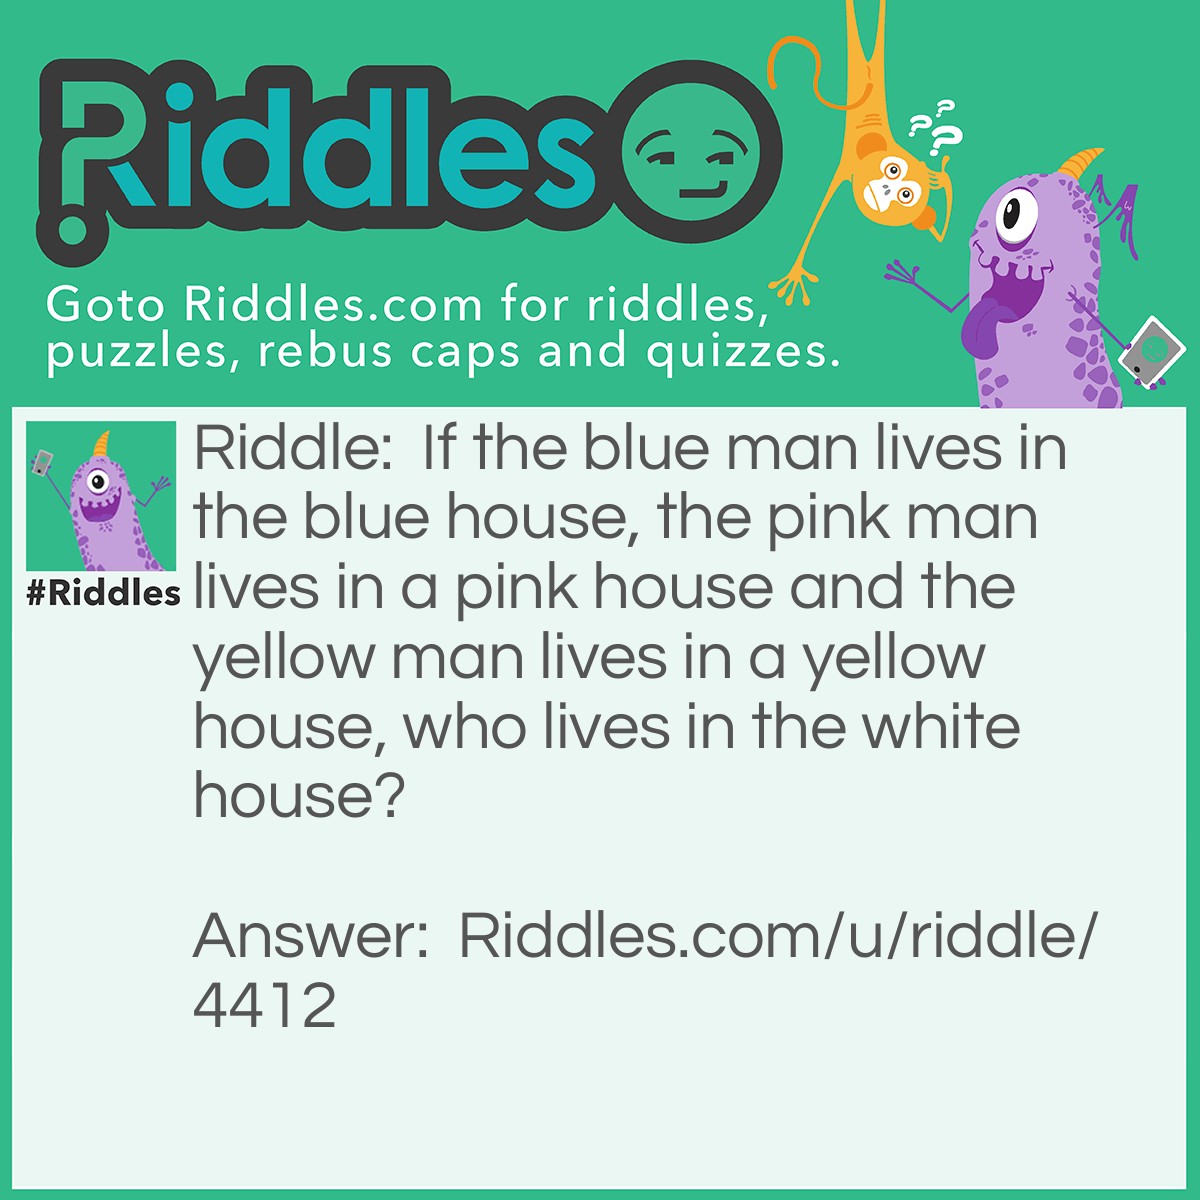 Riddle: If the blue man lives in the blue house, the pink man lives in a pink house and the yellow man lives in a yellow house, who lives in the white house? Answer: The president.